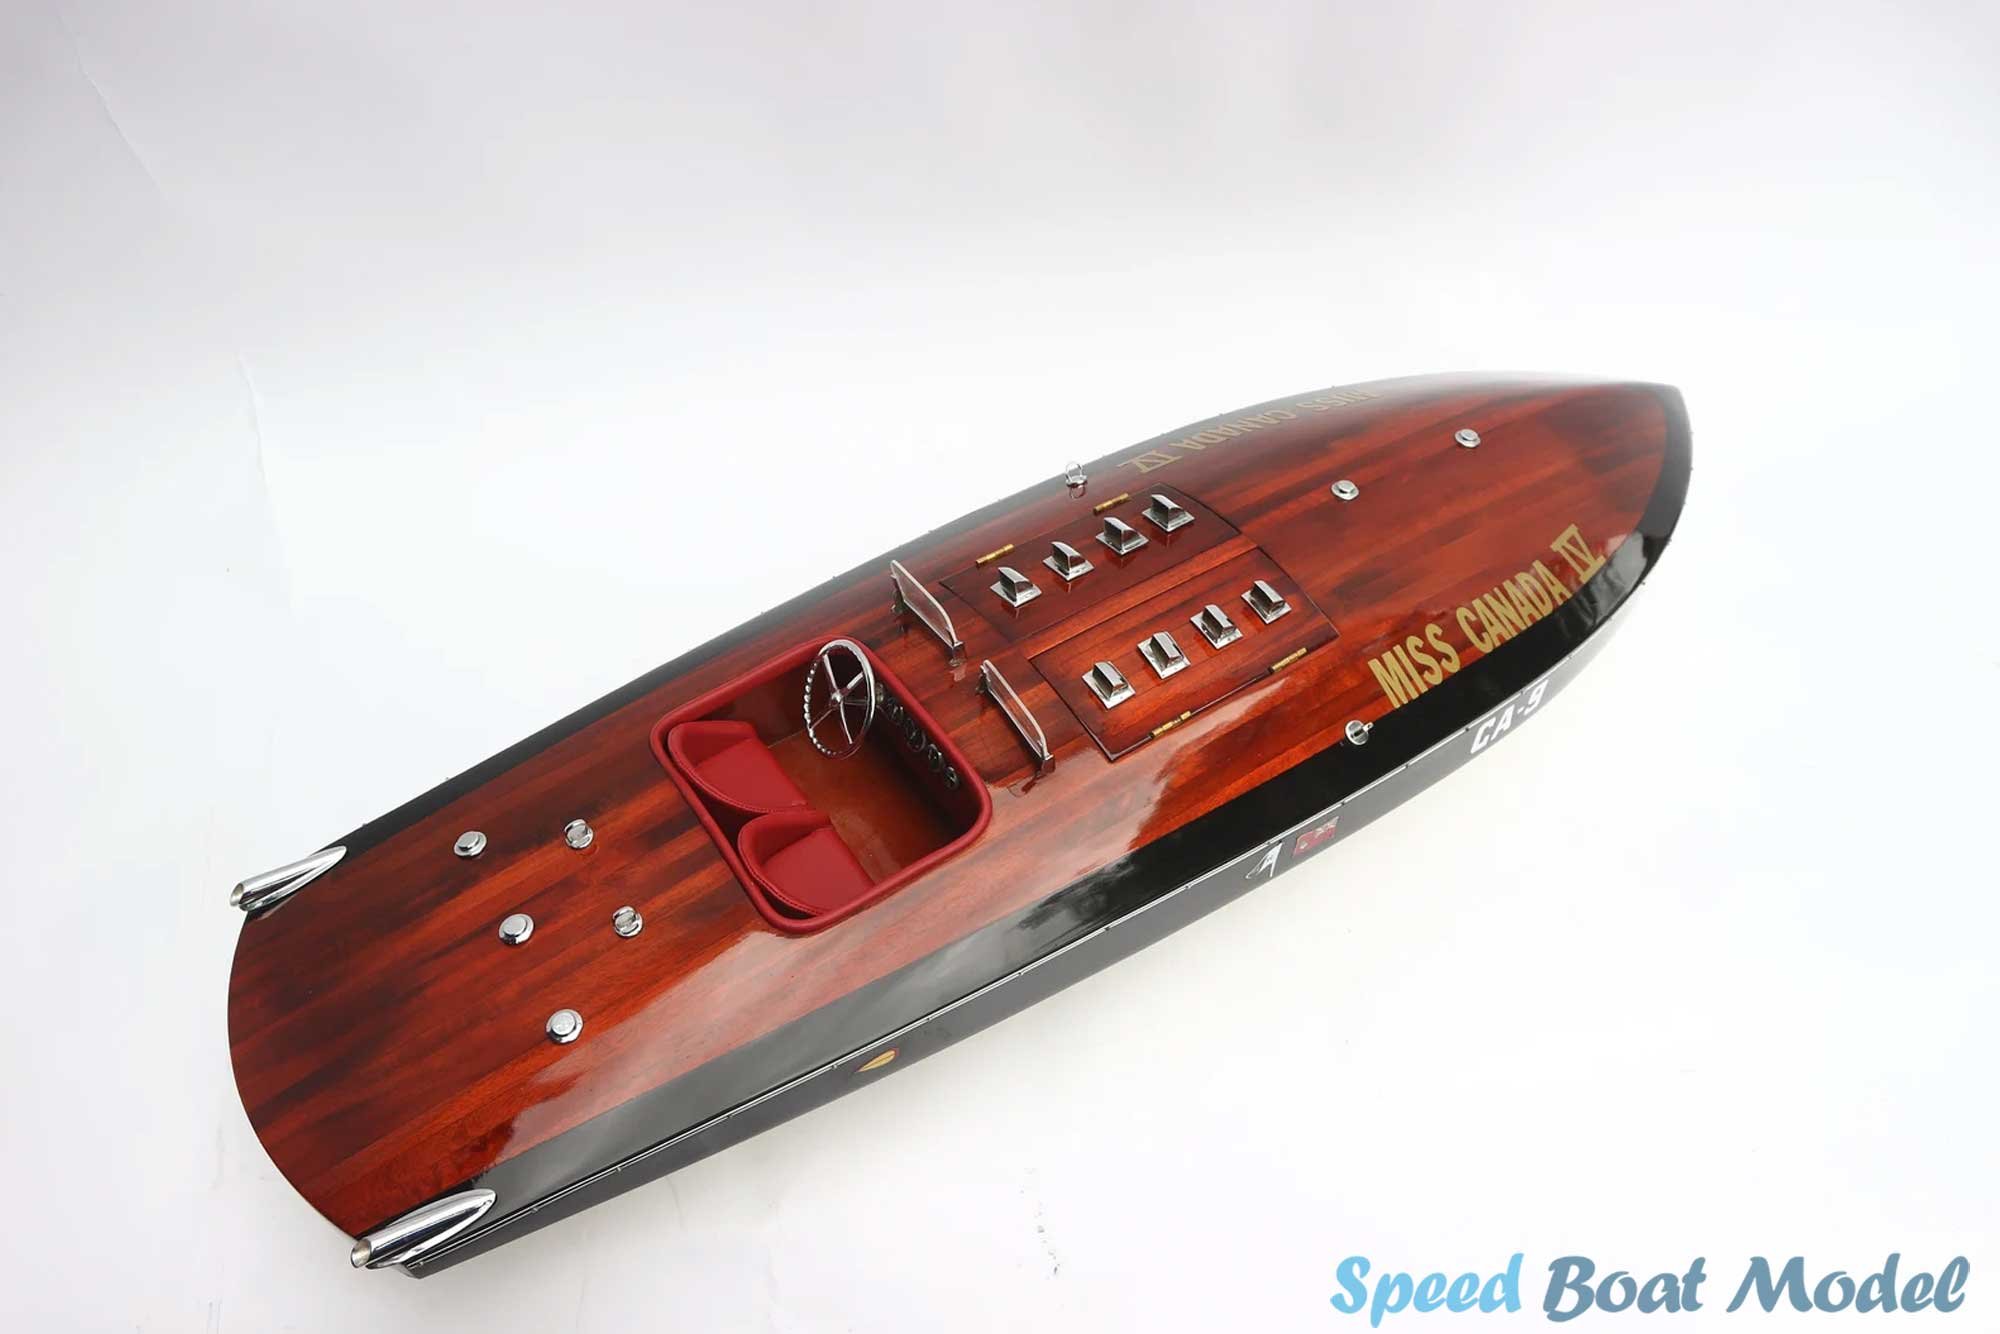 Miss Canda IV CA 9 Speed Boat Model 34 Inches